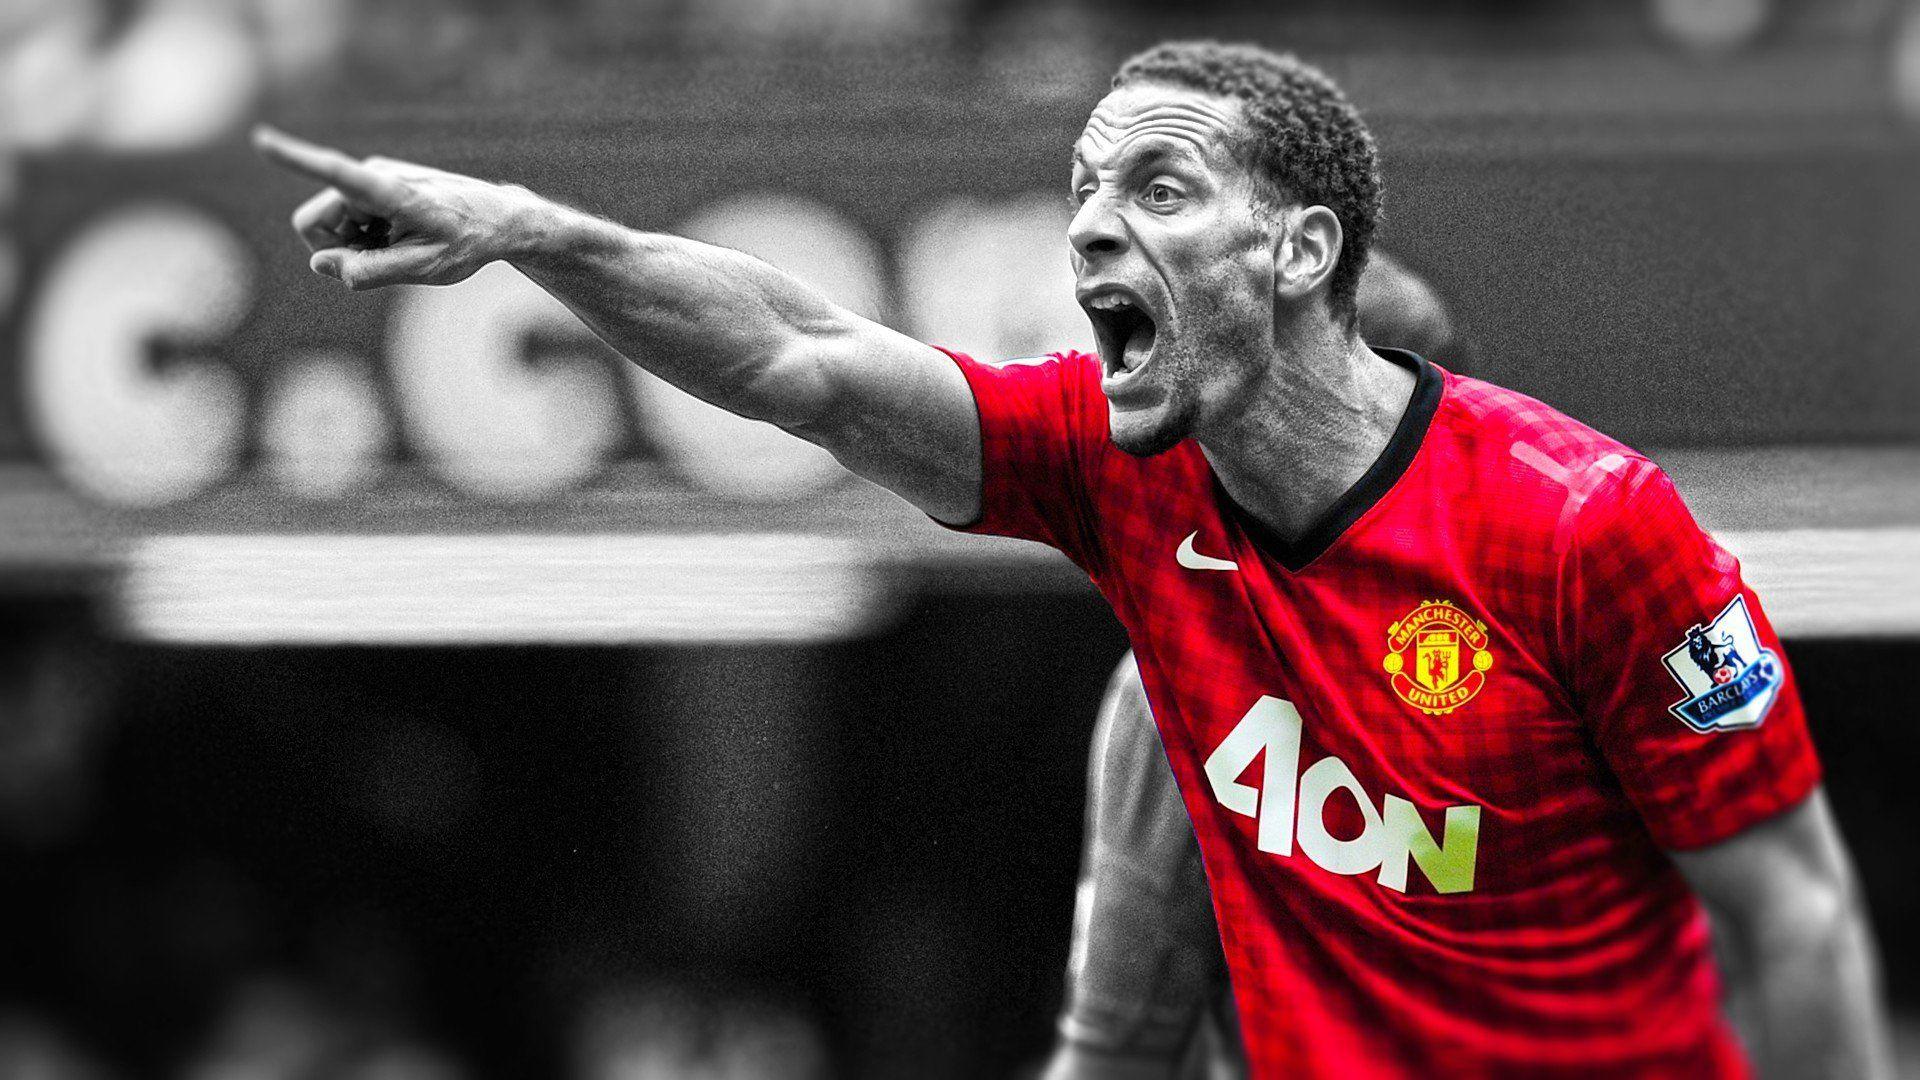 Football Hdr Photography Manchester United Fc Rio Ferdinand Cutout